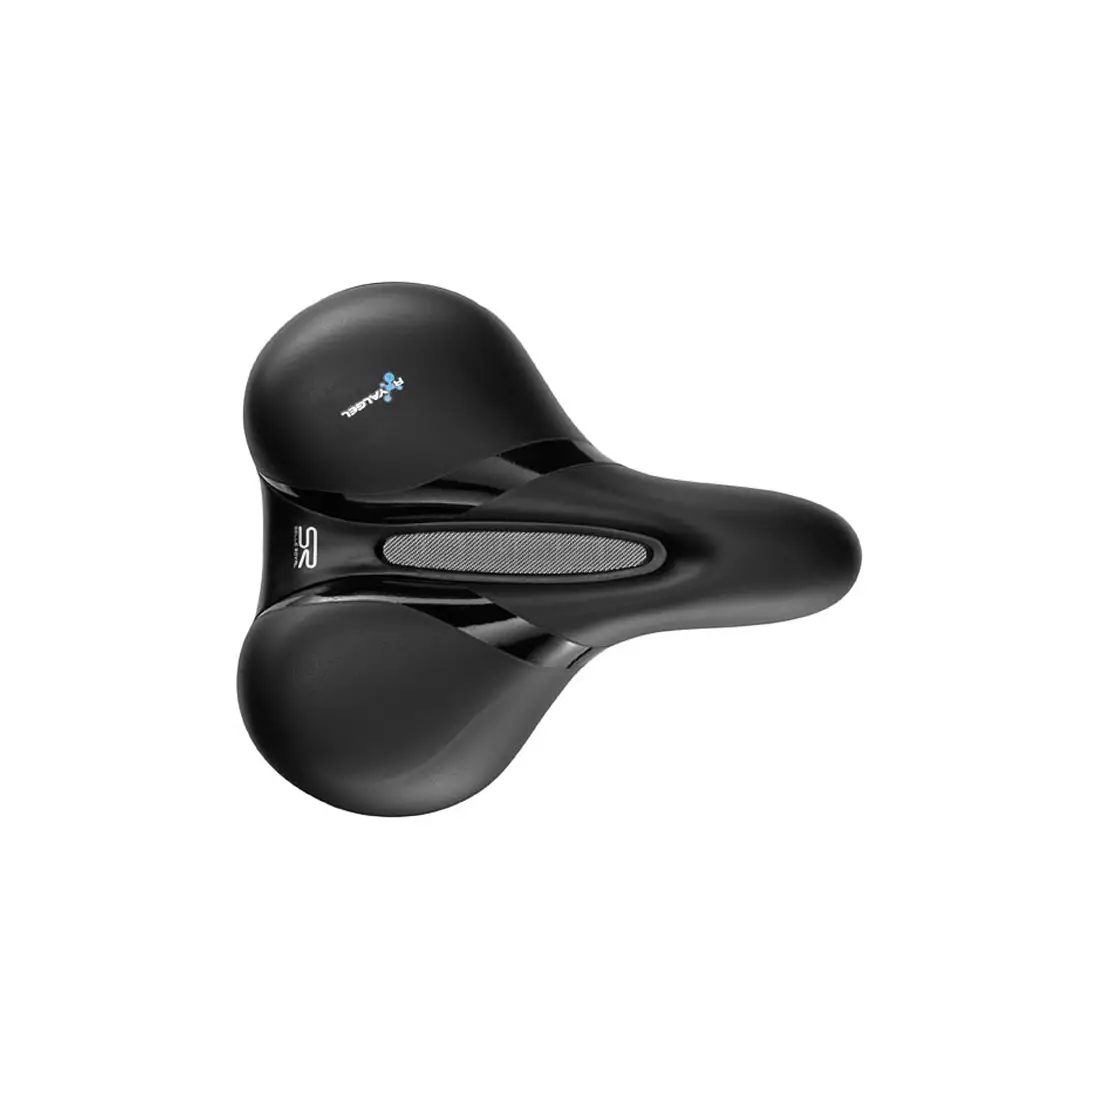 SELLEROYAL RESPIRO SOFT RELAXED bicycle saddle 90st. gel + elastomers unisex SR-5132DETB091L4